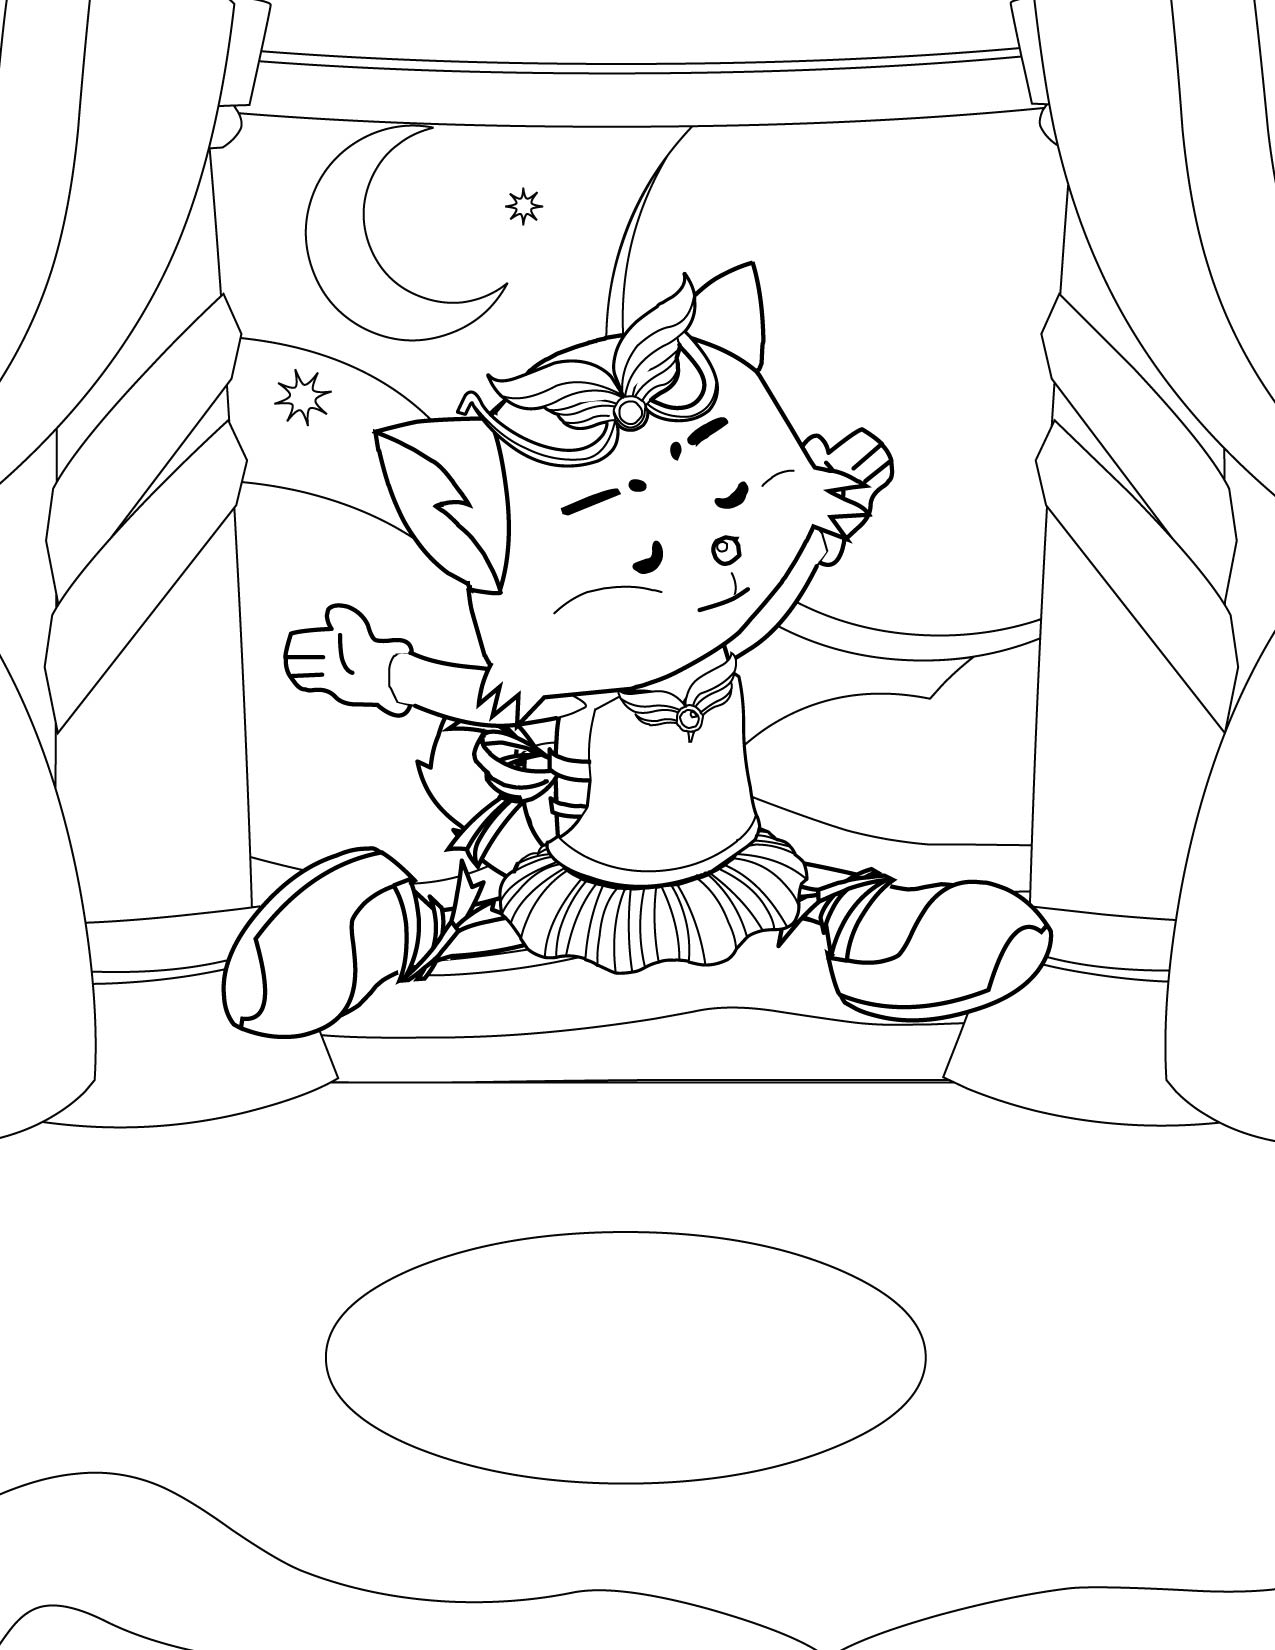 Stage Coloring Page at GetColorings.com | Free printable colorings